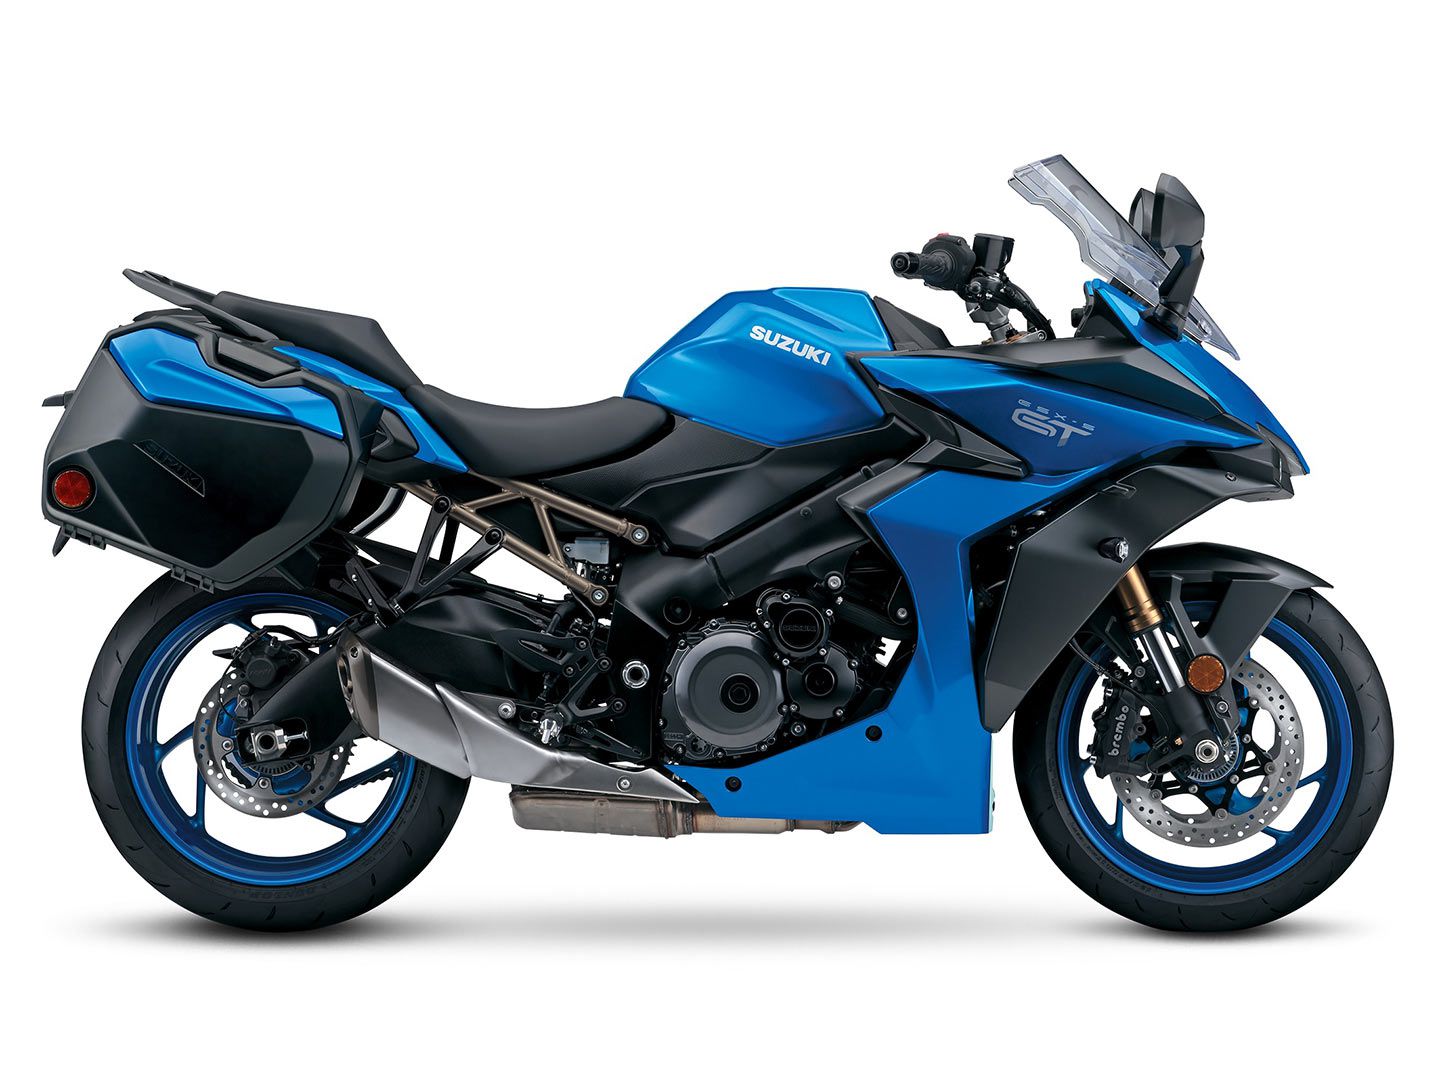 The Suzuki GSX-S1000GT and GT+ are capable sport-tourers thanks to a combination of great engine and chassis, modern rider aids, comfortable ergos, good wind protection, hard luggage (standard on the GT+ model), and an affordable price tag. The 2023 GT+ (shown) is now available in a brighter Metallic Triton Blue color option, alongside Glass Sparkle Black.